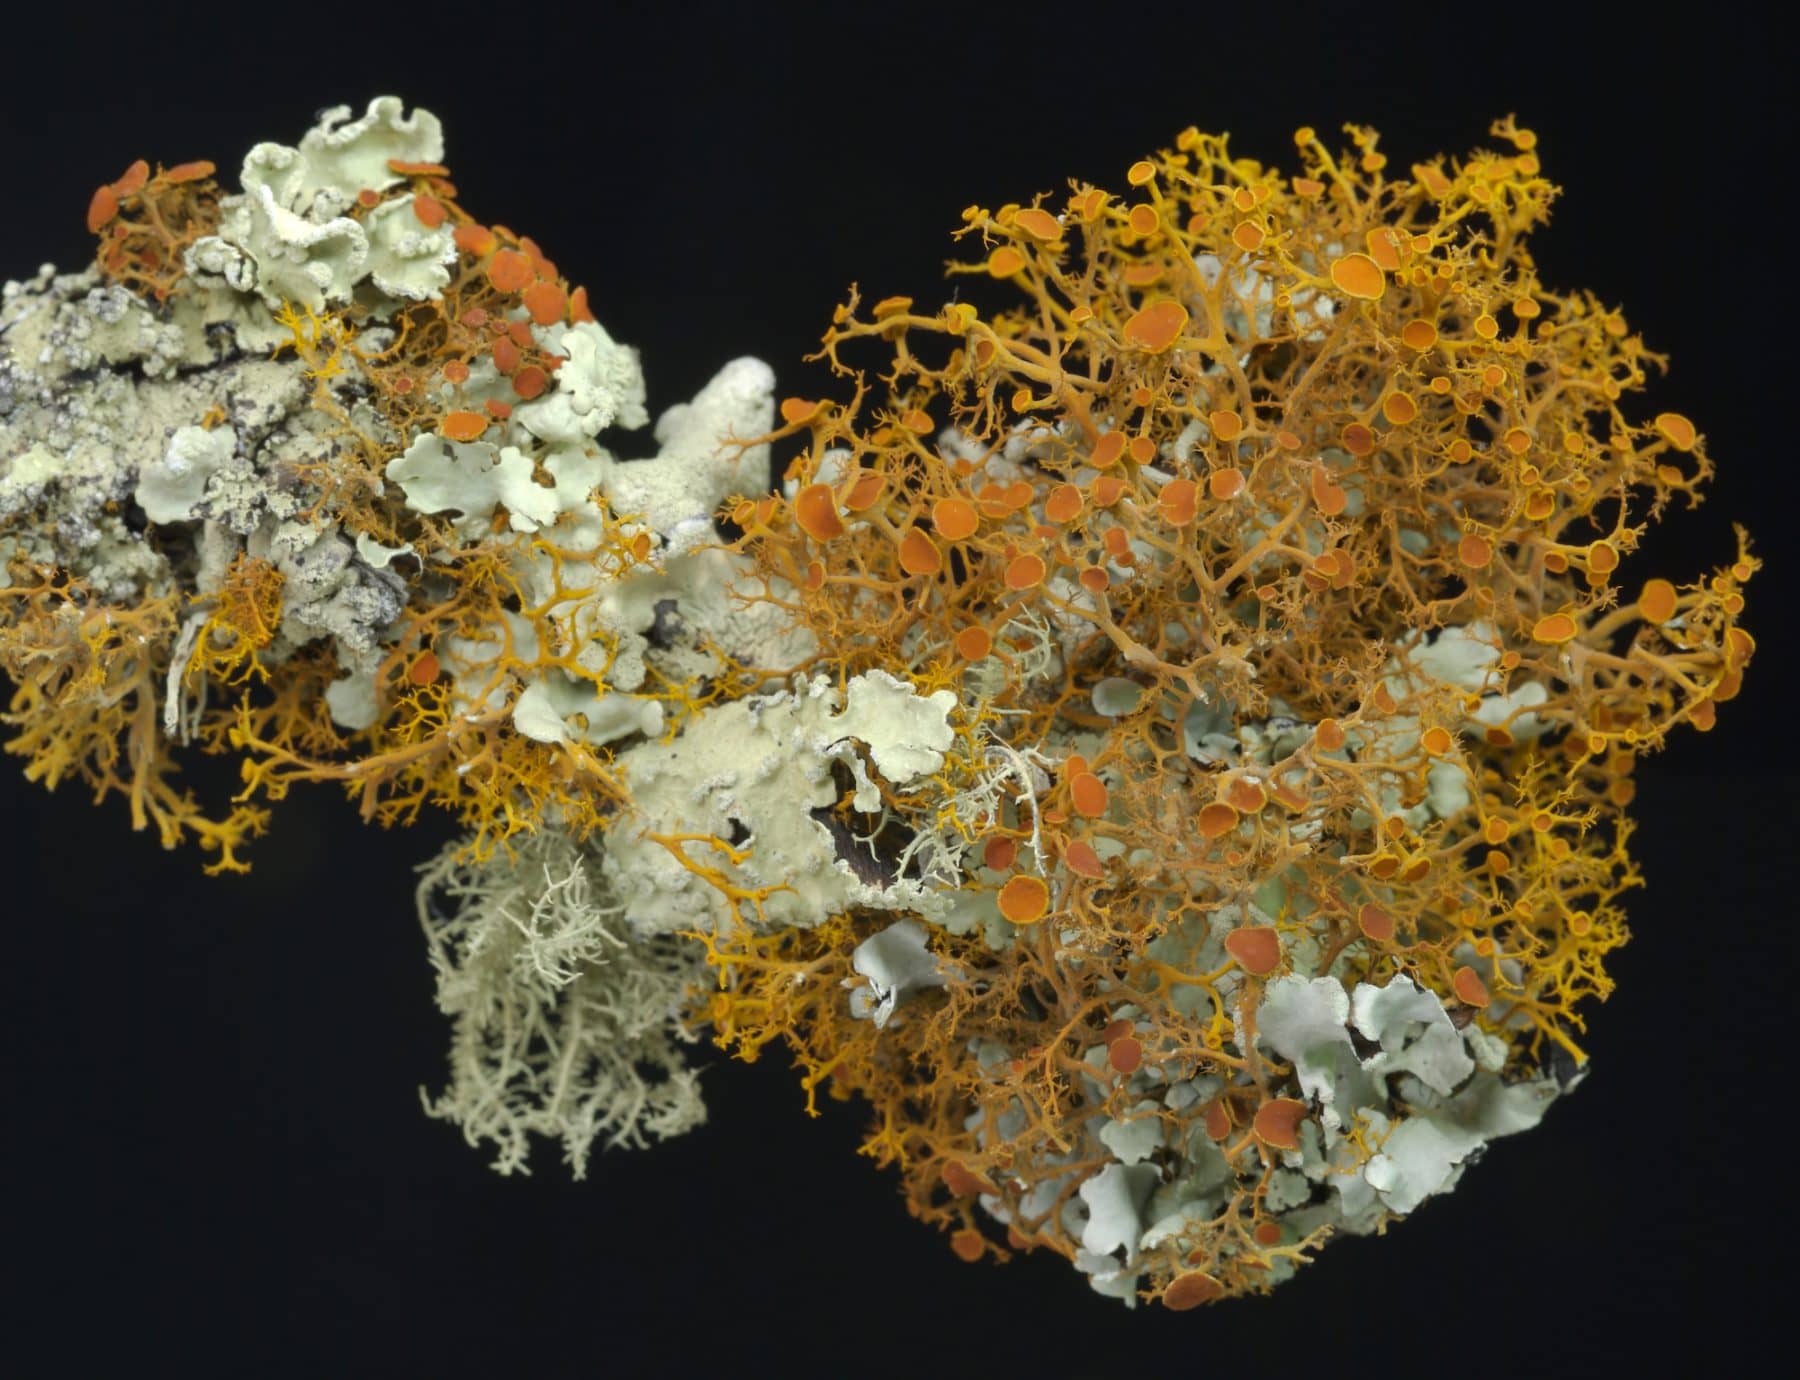 Image: lichen in orange and green growing in many shapes